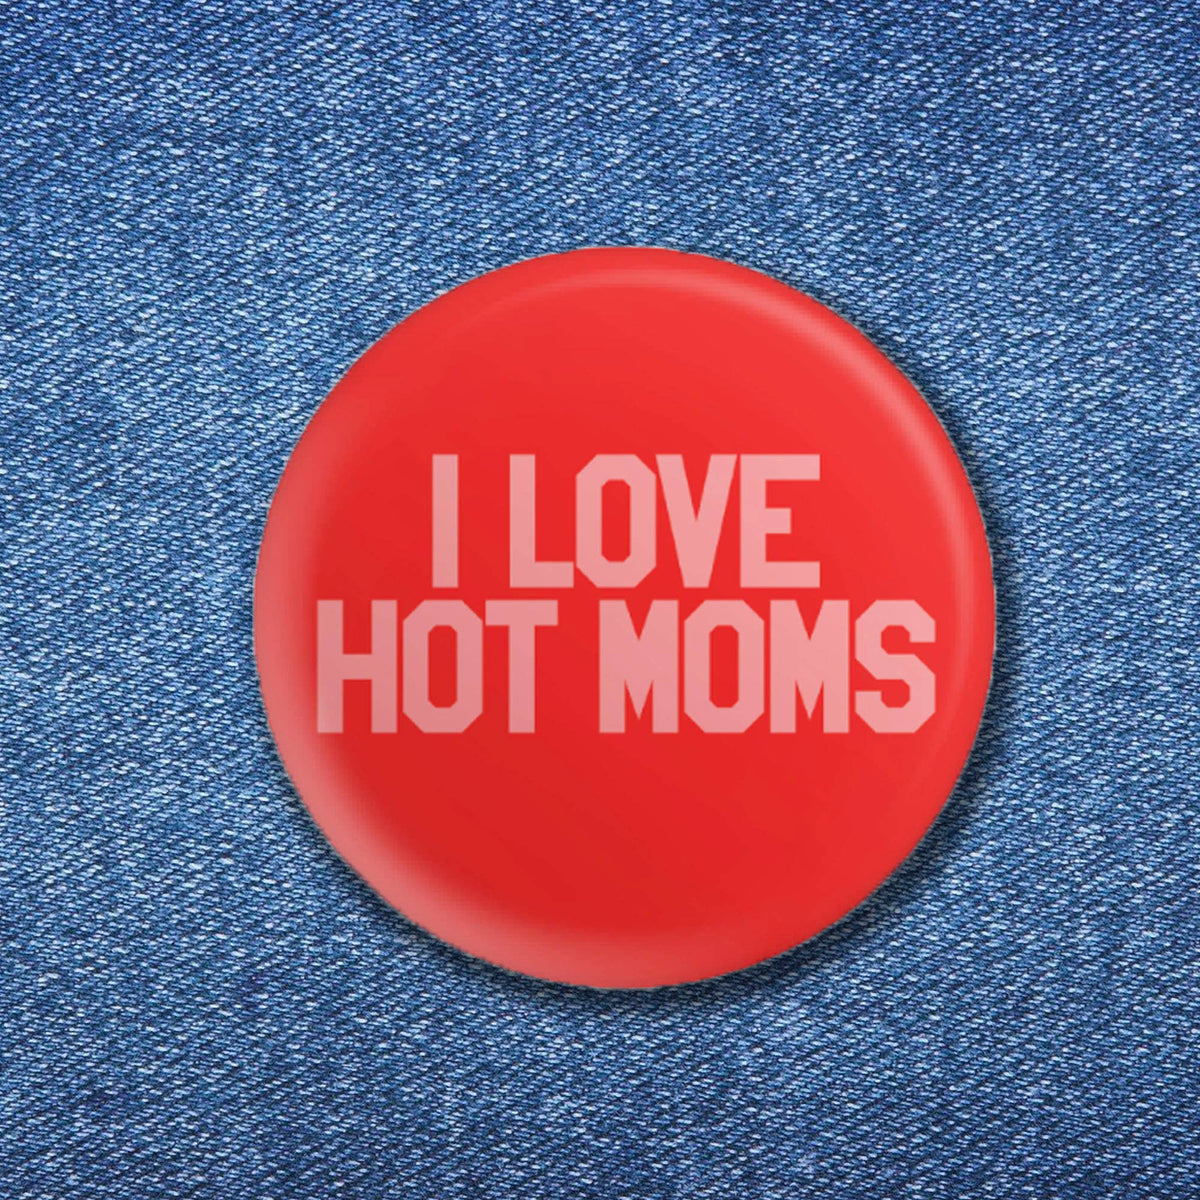 I Love Hot Moms Button Pin